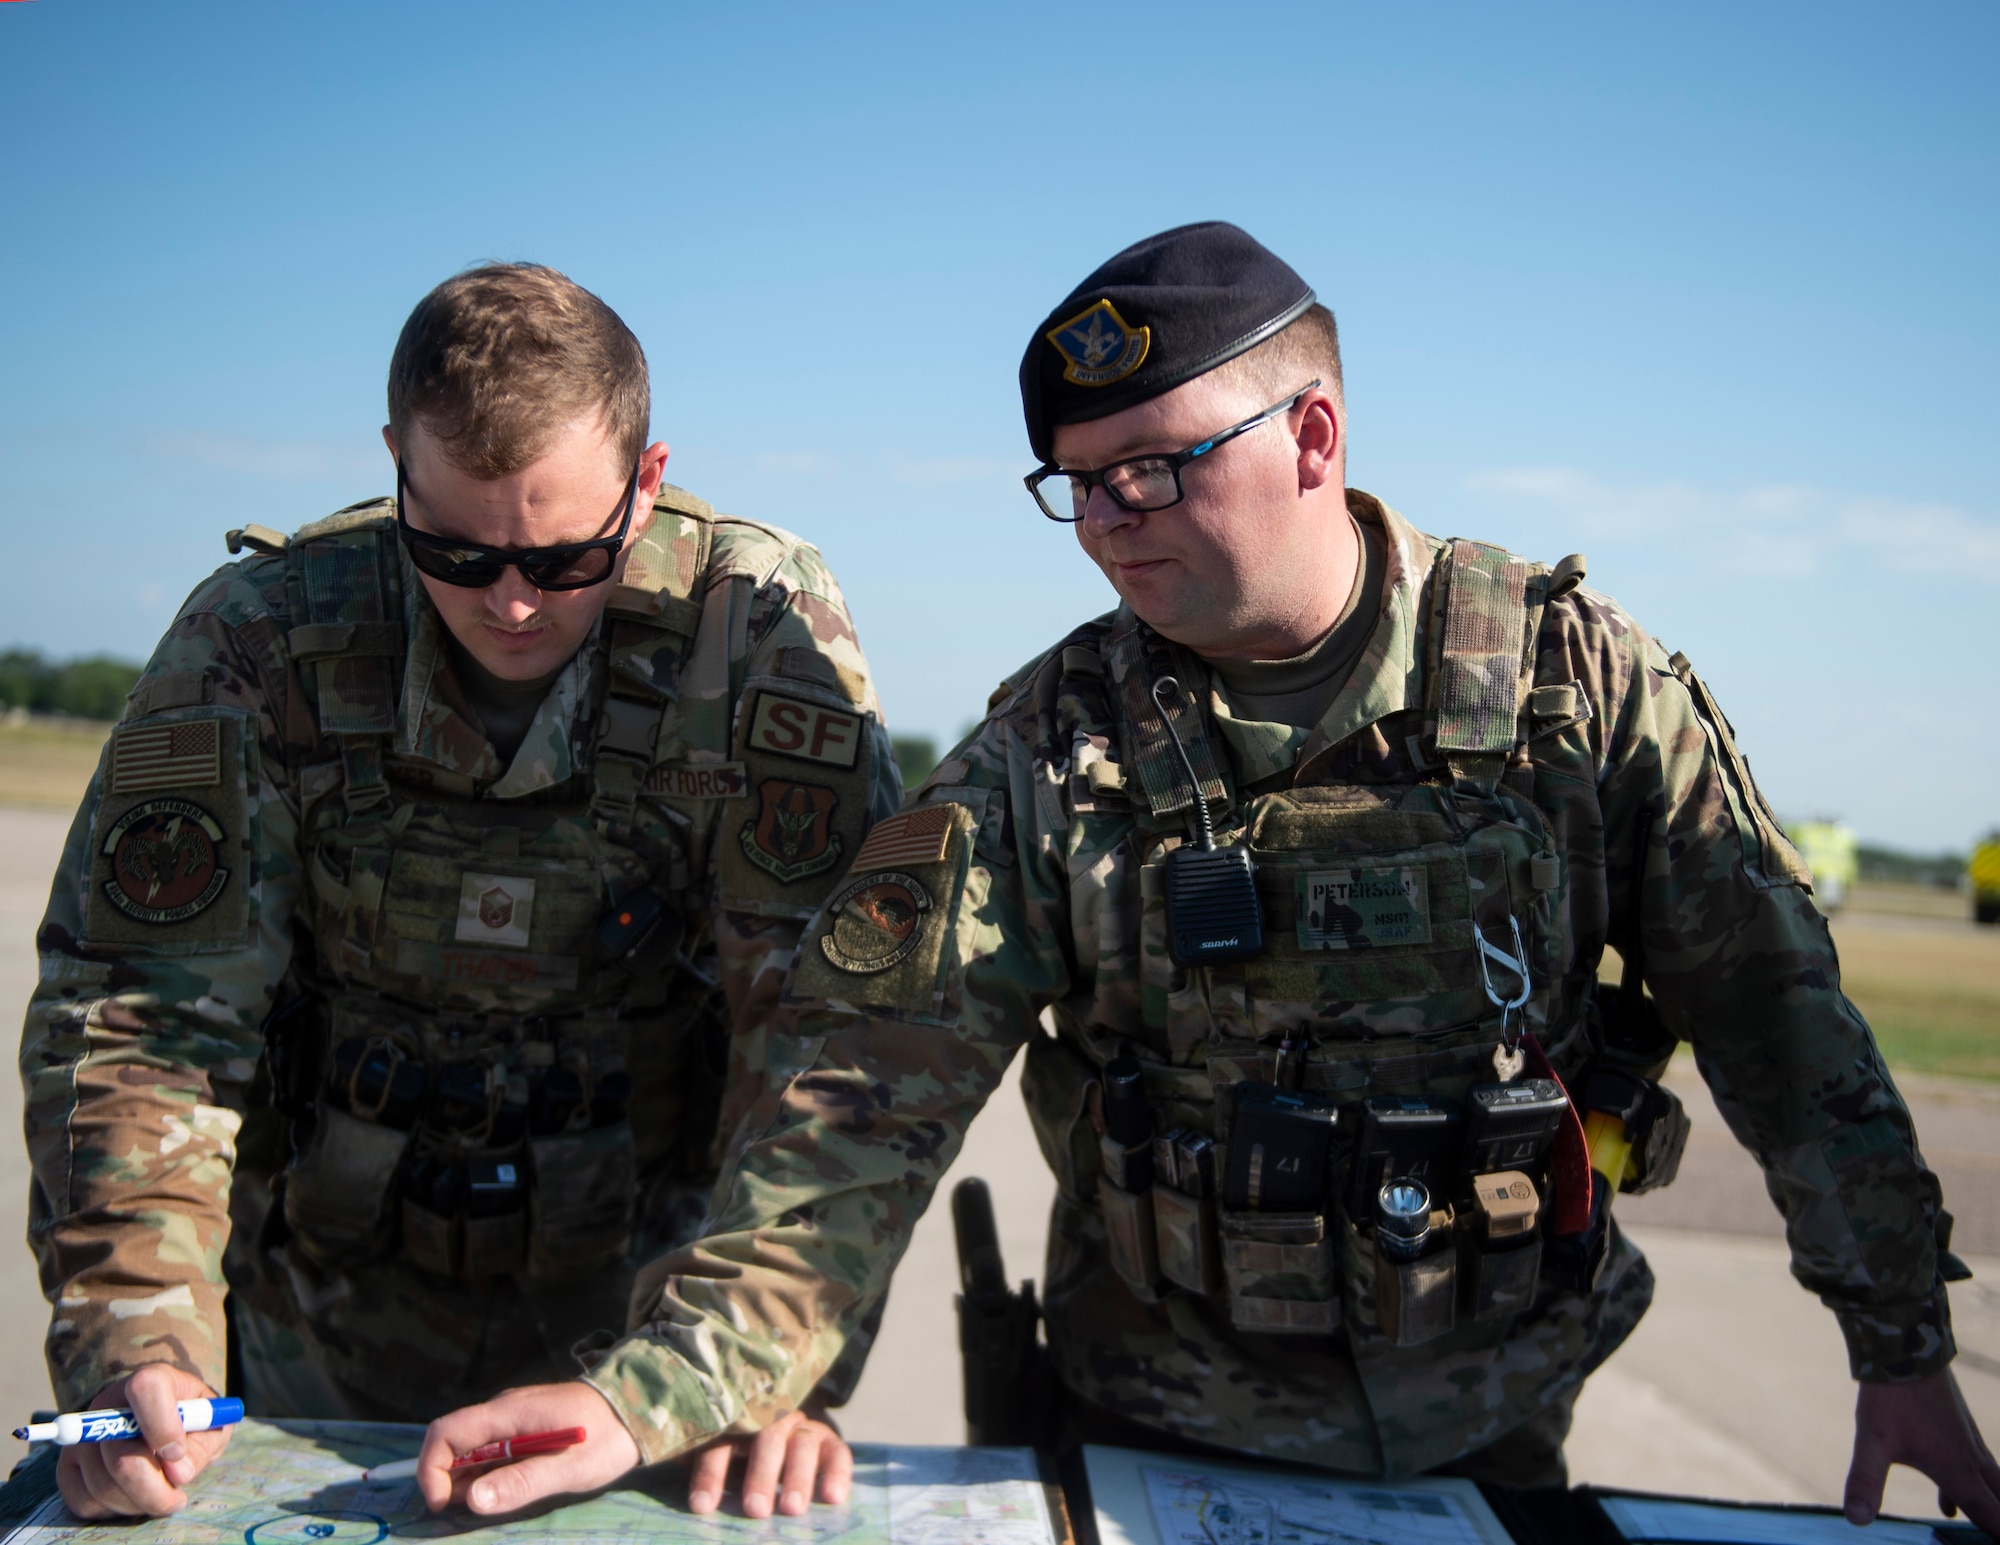 U.S. Air Force Airmen from the 133rd and 934th Security Forces Squadrons fill in the information on a map during a Massive Accident Response Exercise (MARE) in St. Paul, Minn., Aug. 10, 2022.